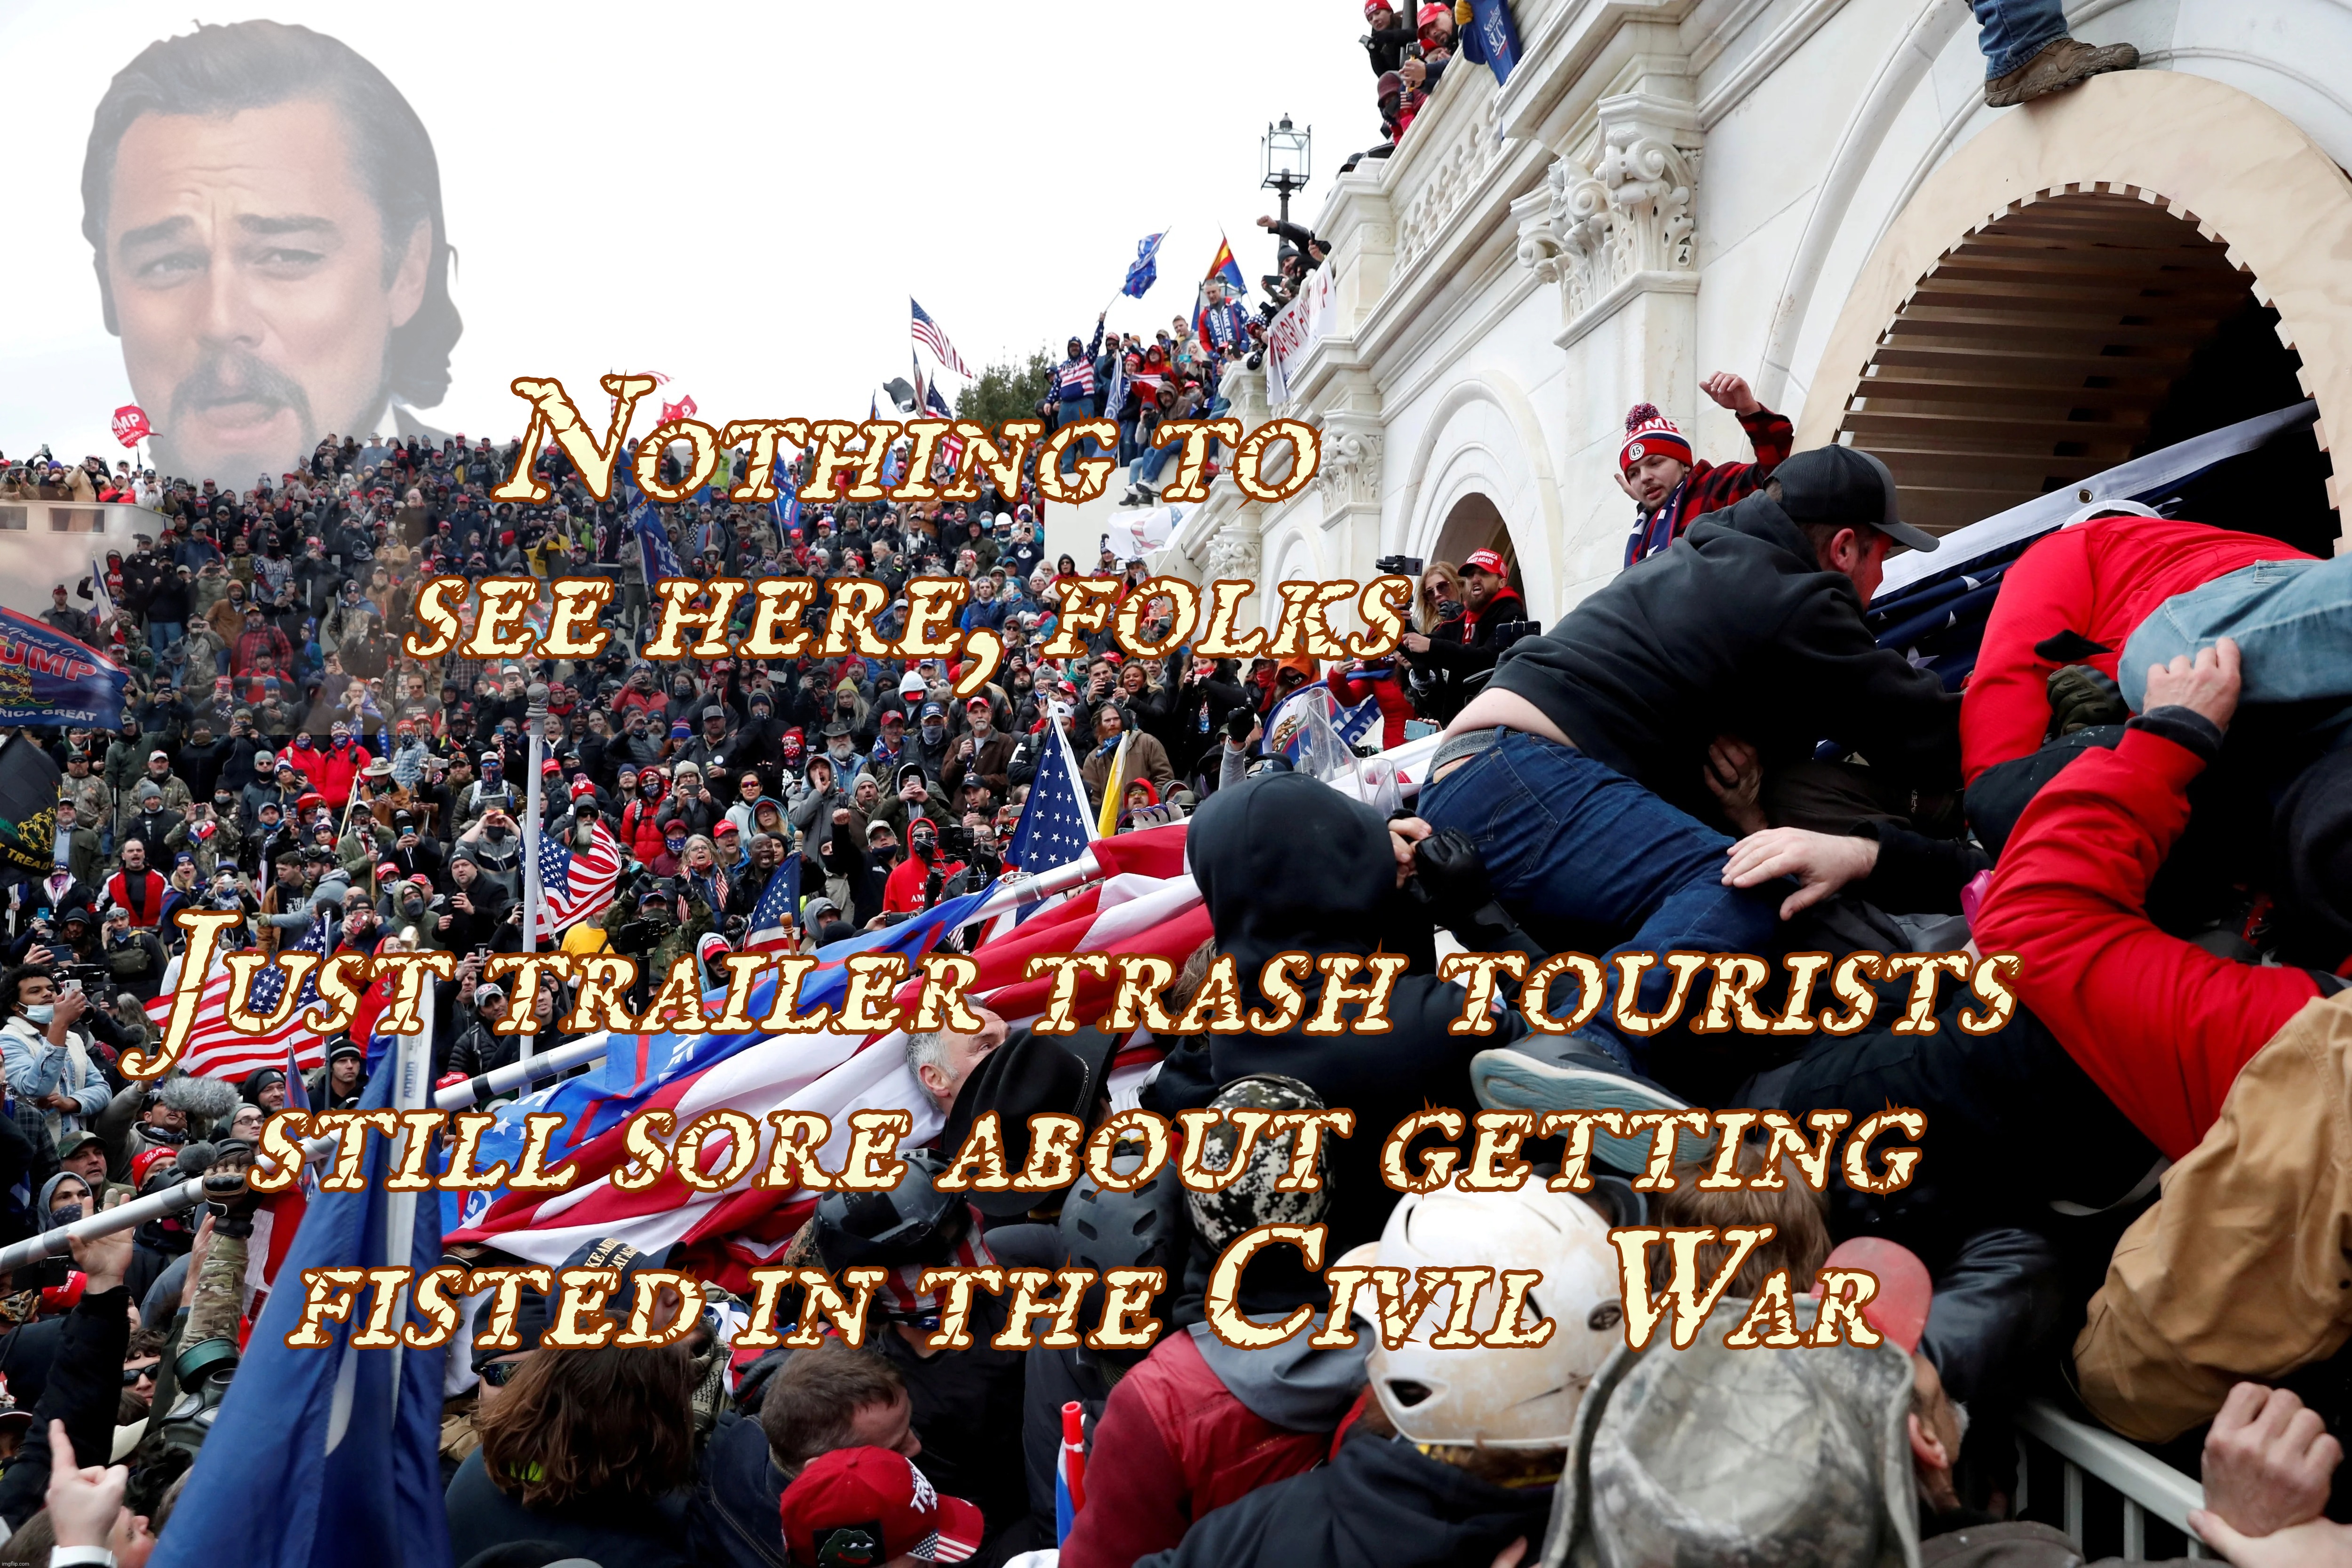 Nothing to see here, folks Just trailer trash tourists
still sore about getting
fisted in the Civil War | made w/ Imgflip meme maker